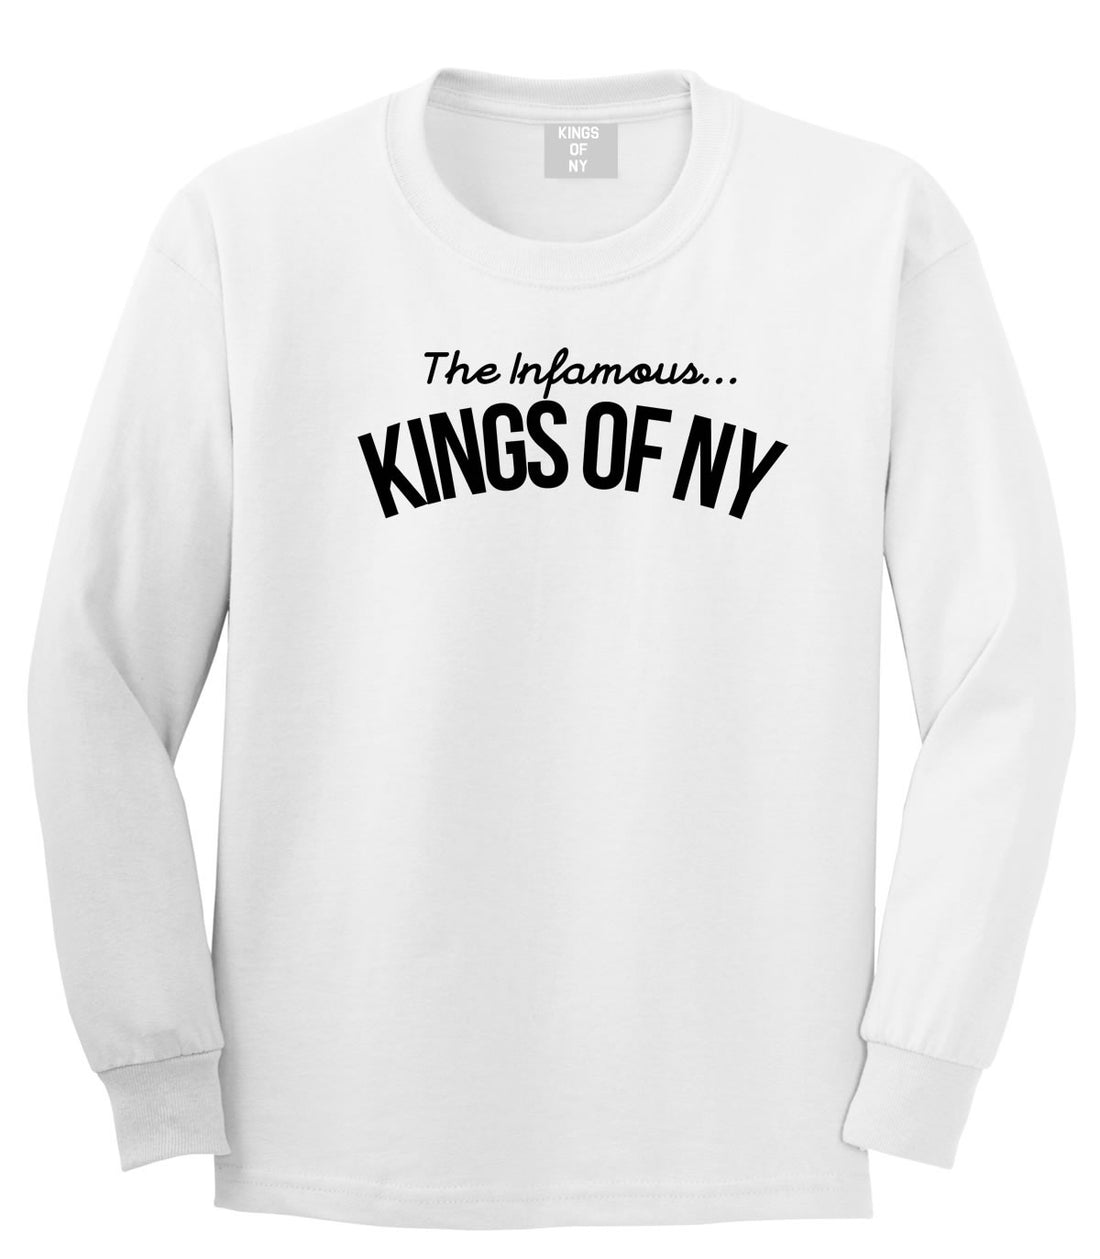 The Infamous Kings Of NY Long Sleeve T-Shirt in White By Kings Of NY